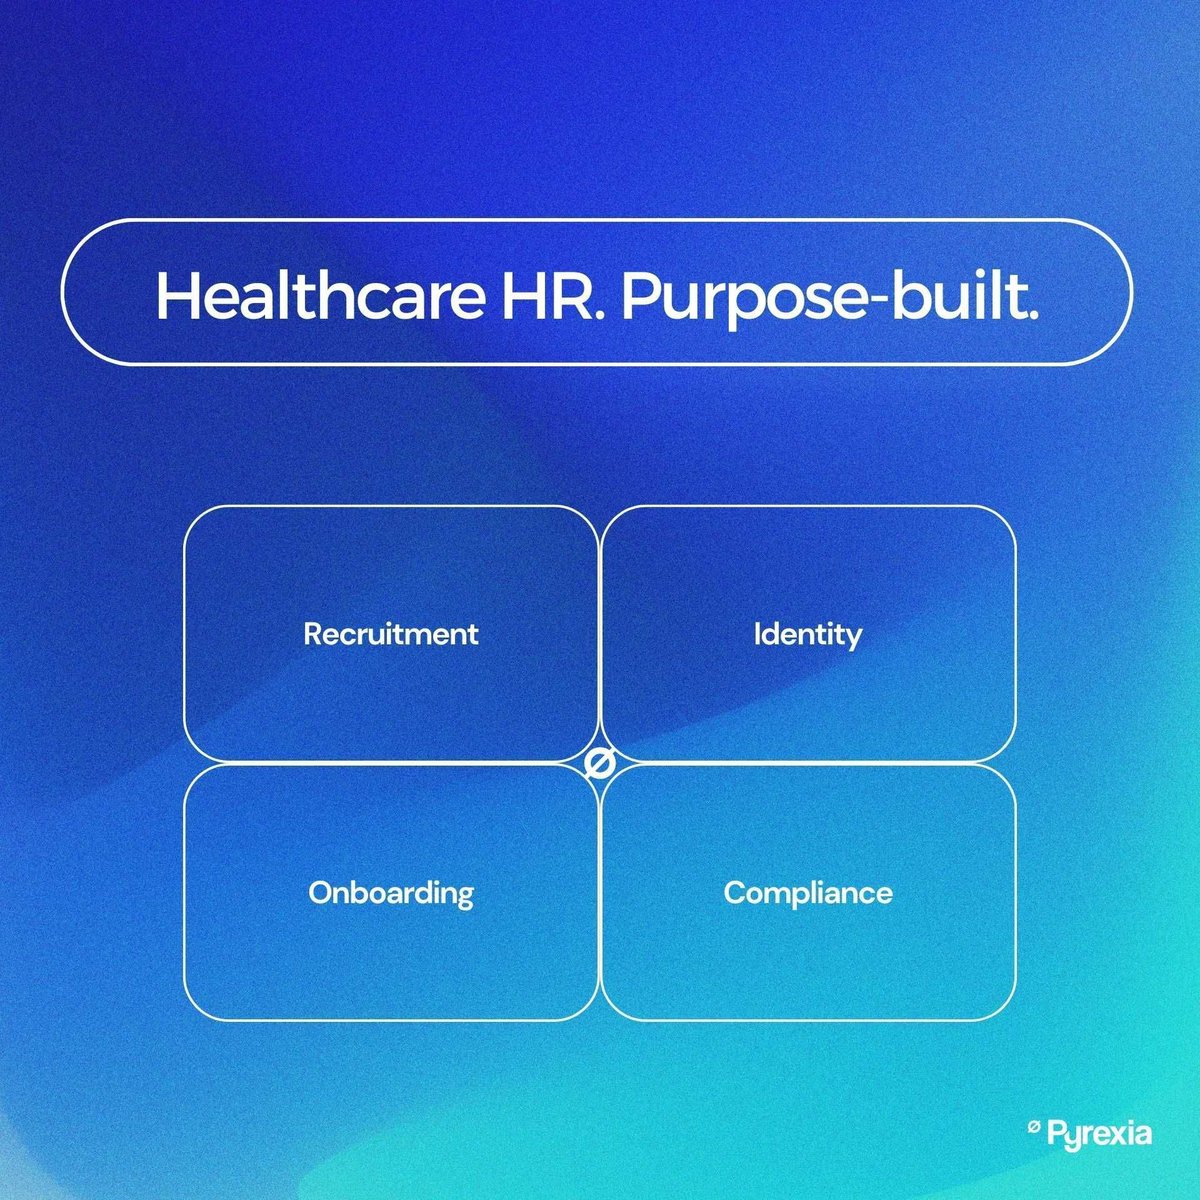 Streamlining onboarding and credential updates means clinicians can start making a difference faster. Discover Pyrexia's efficient HR solutions. 

#QuickOnboarding #ClinicianReadiness #HealthcareHR 
#hr #compliance #digitalstaffpassport #nhs #onboarding #recruitment #identity